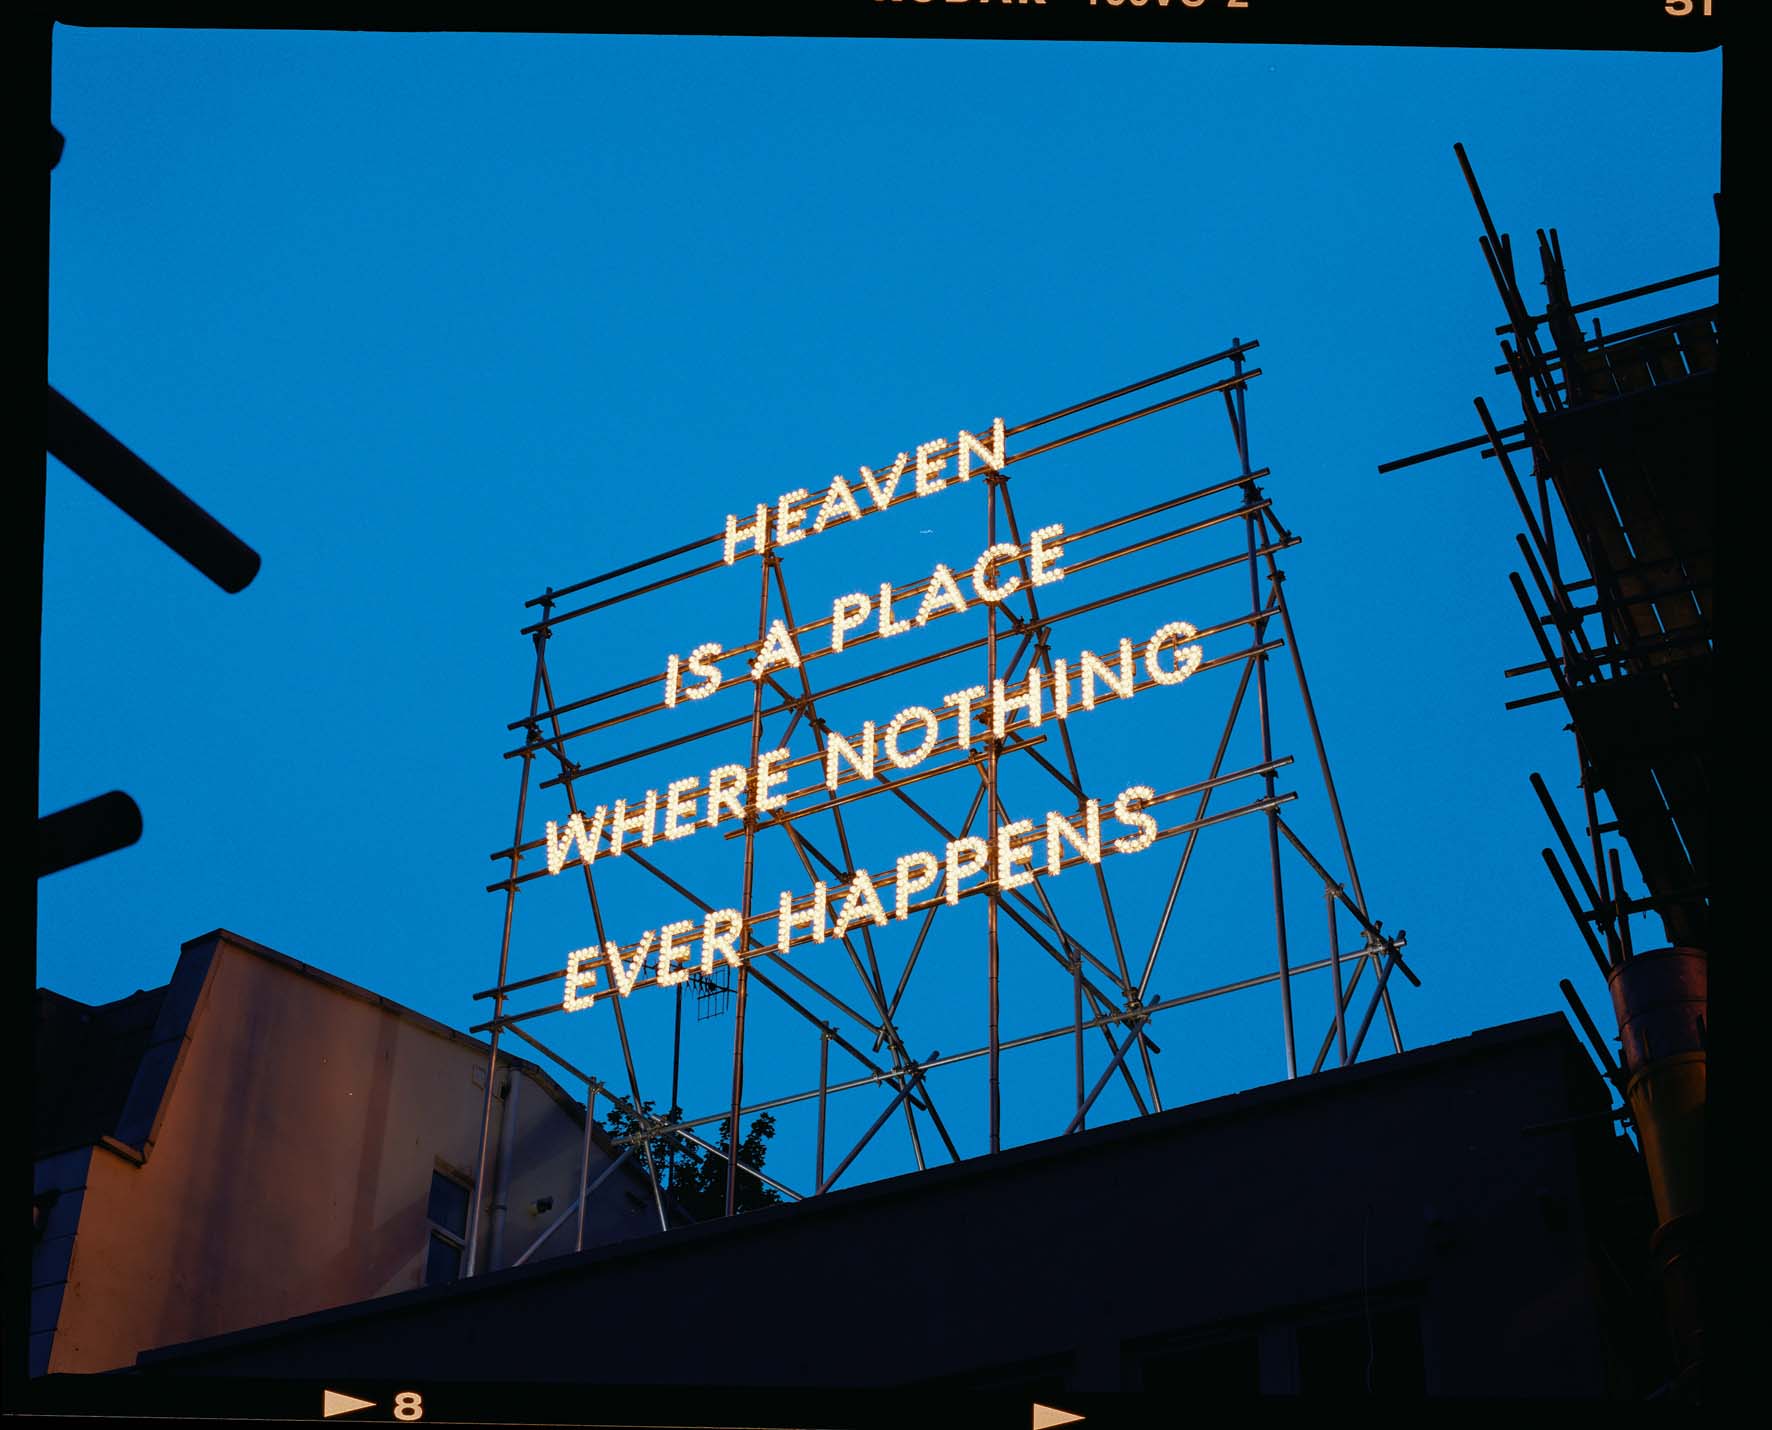 Nathan Coley, Heaven Is A Place Where Nothing Ever Happens, at Folkestone Triennial. Photograph by Thierry Bal